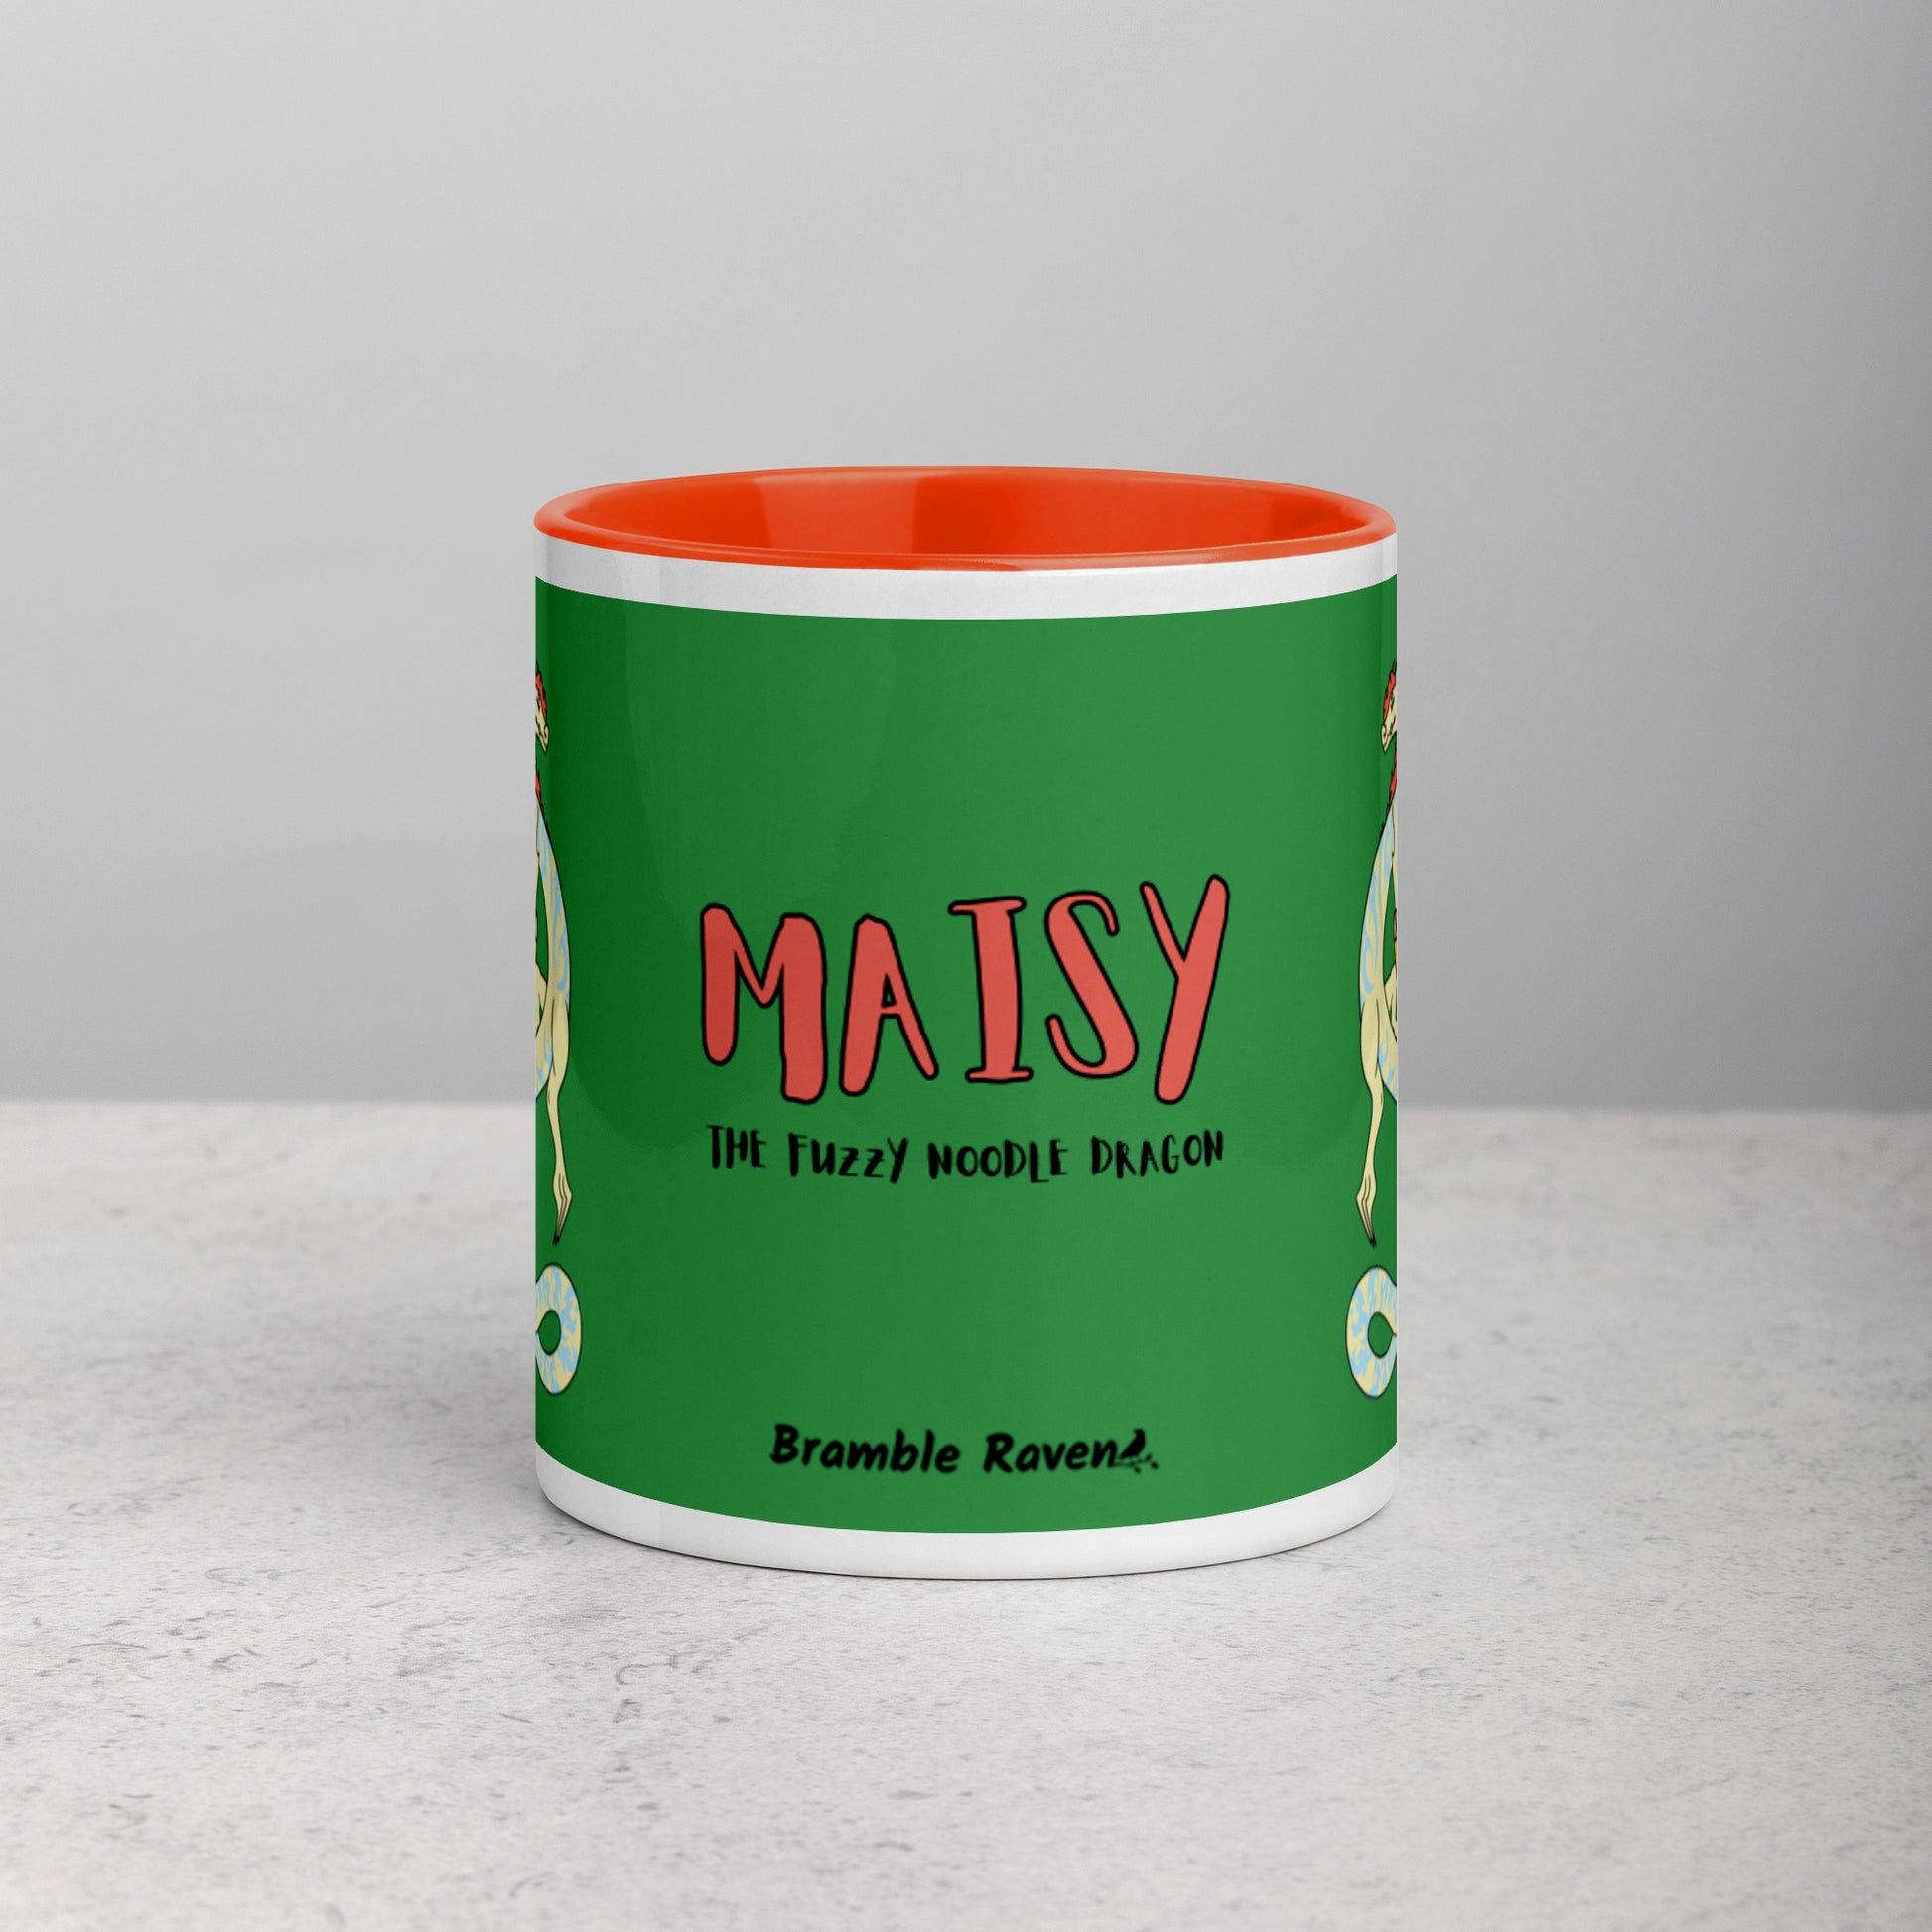 11 ounce white ceramic mug. Orange inside and handle. Features double-sided image of Maisy the Fuzzy Noodle Dragon with a slice of pizza. Shown on tabletop. Front view of mug shows Maisy the Fuzzy Noodle Dragon text and Bramble Raven logo.